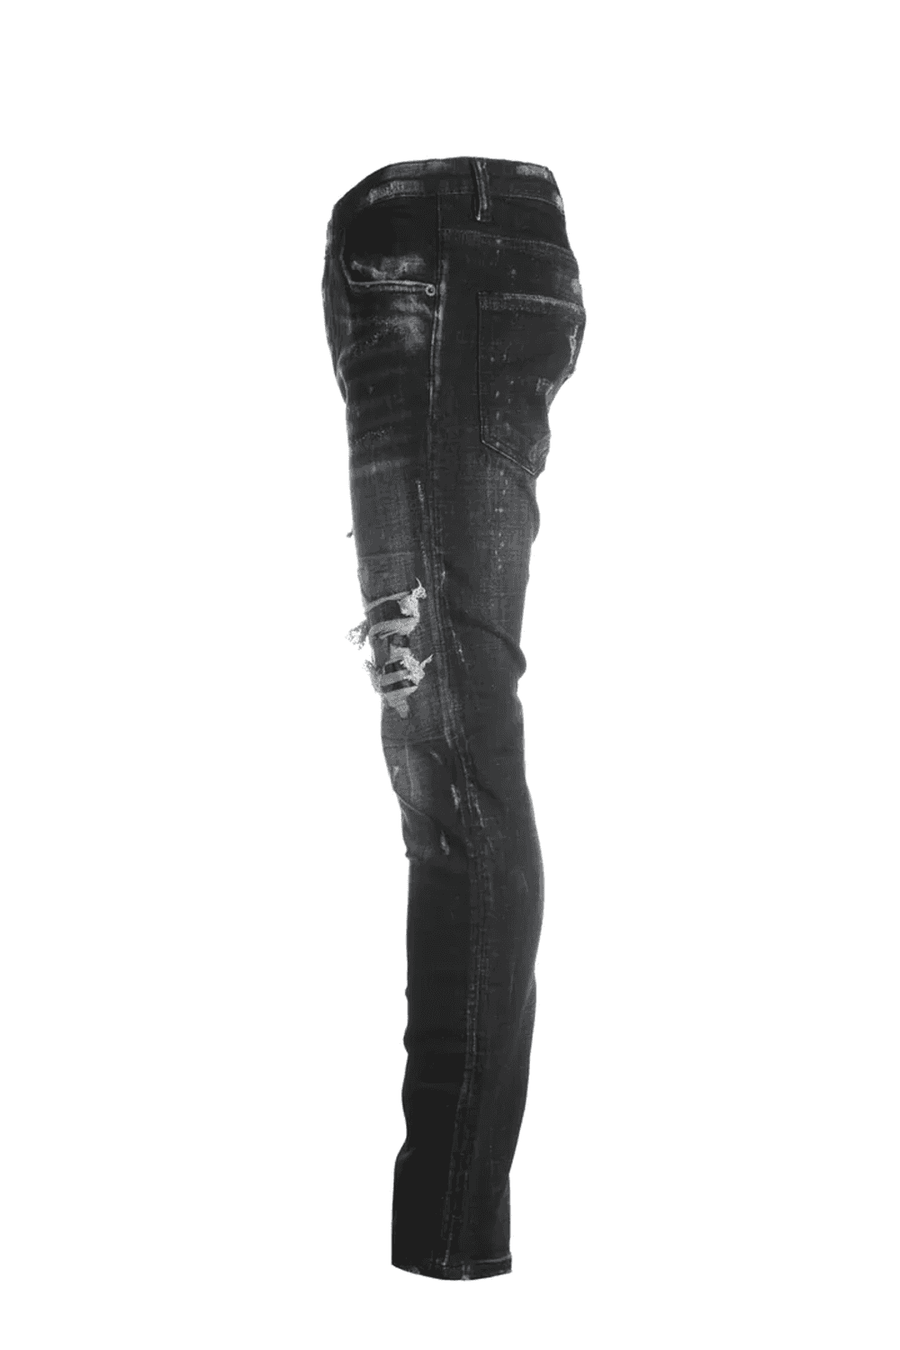 Buy the 7TH HVN S-2154 Jean Black at Intro. Spend £50 for free UK delivery. Official stockists. We ship worldwide.